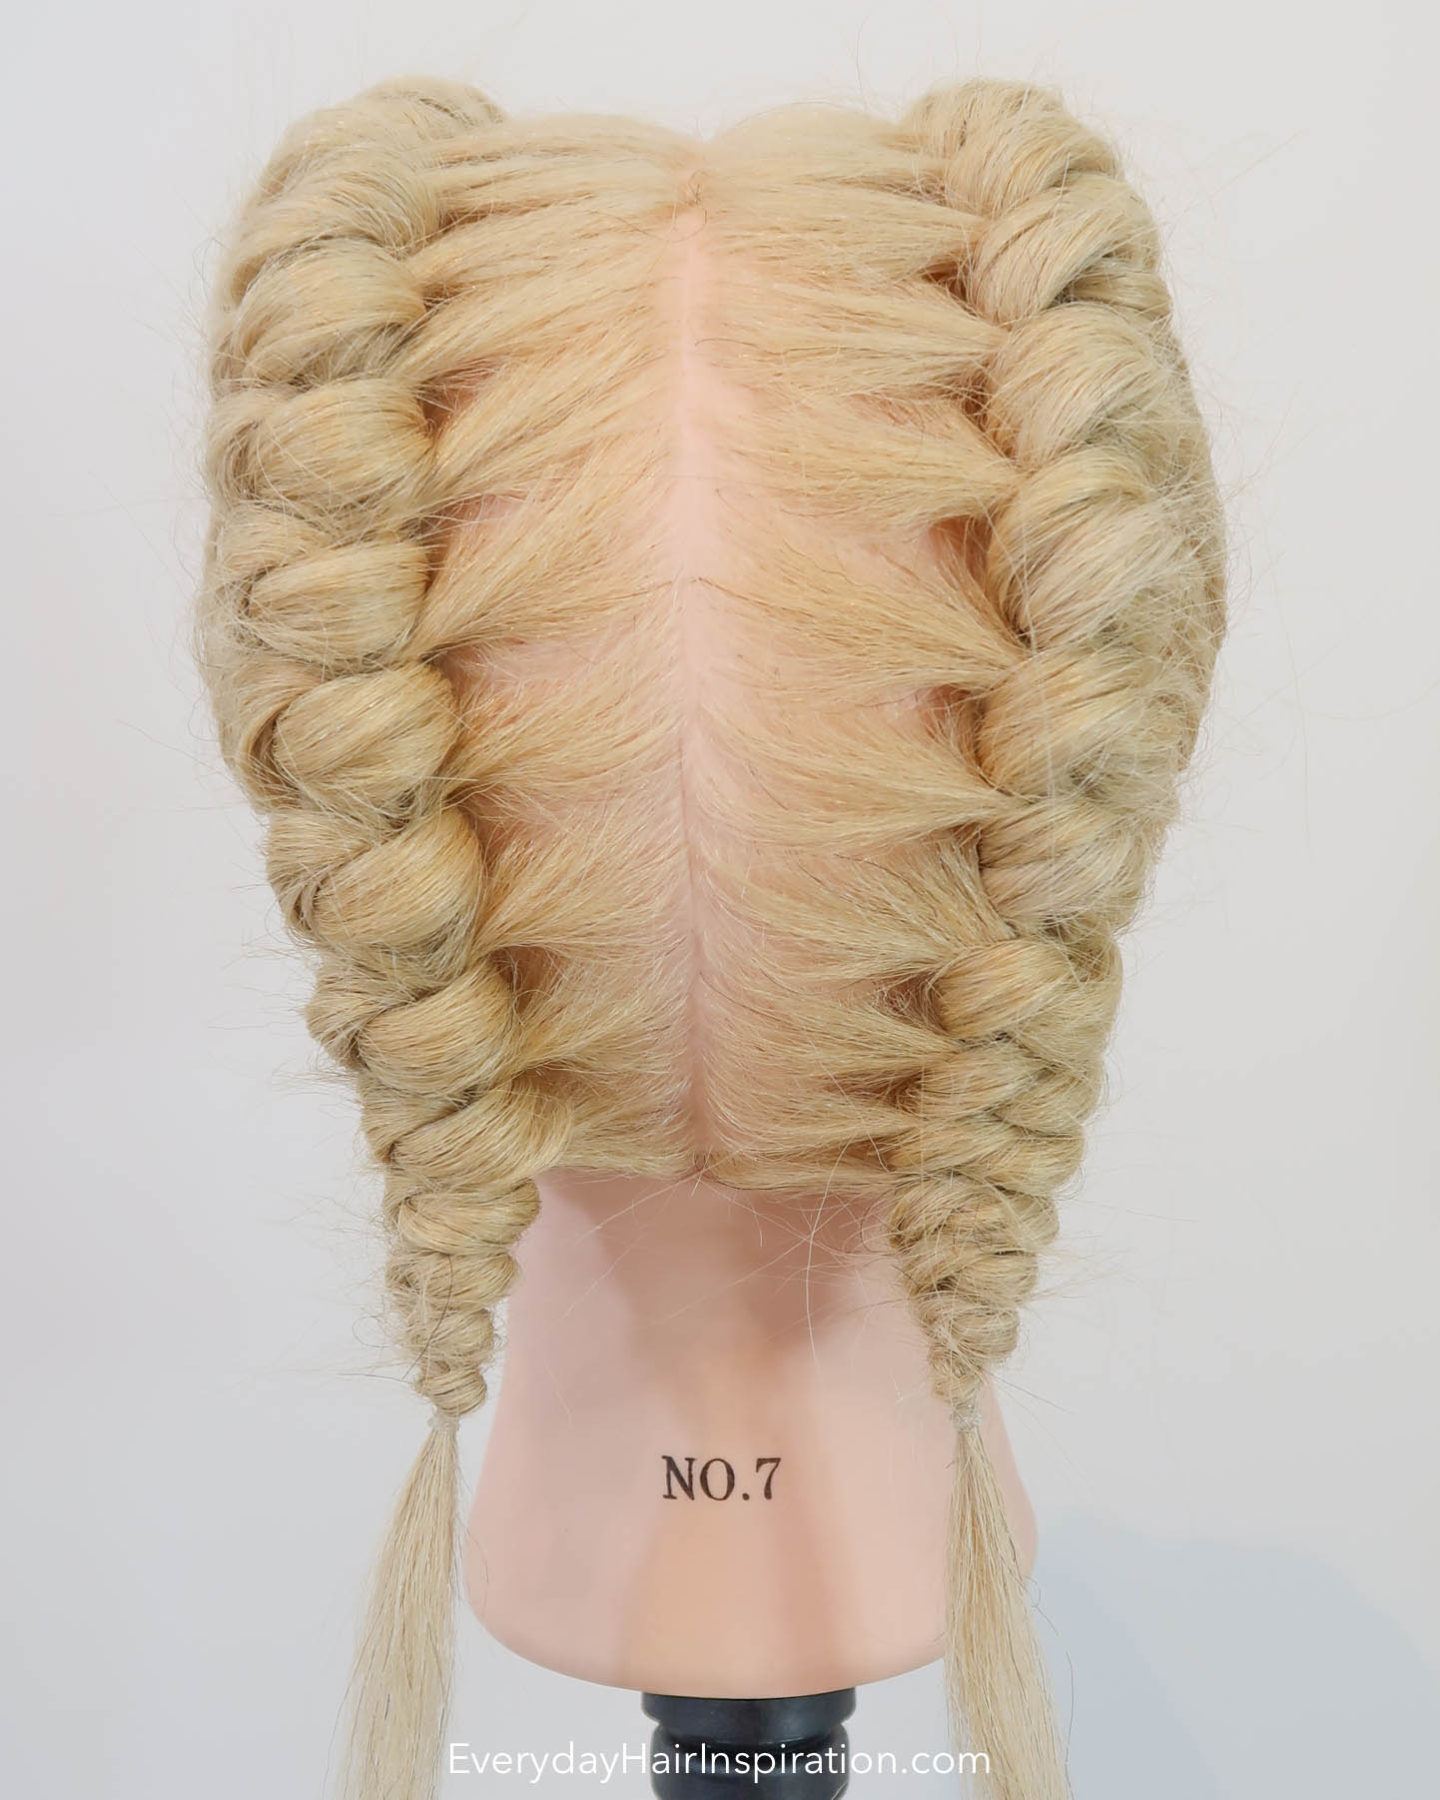 Blonde hairdresser head, seen from the back with double knot braids